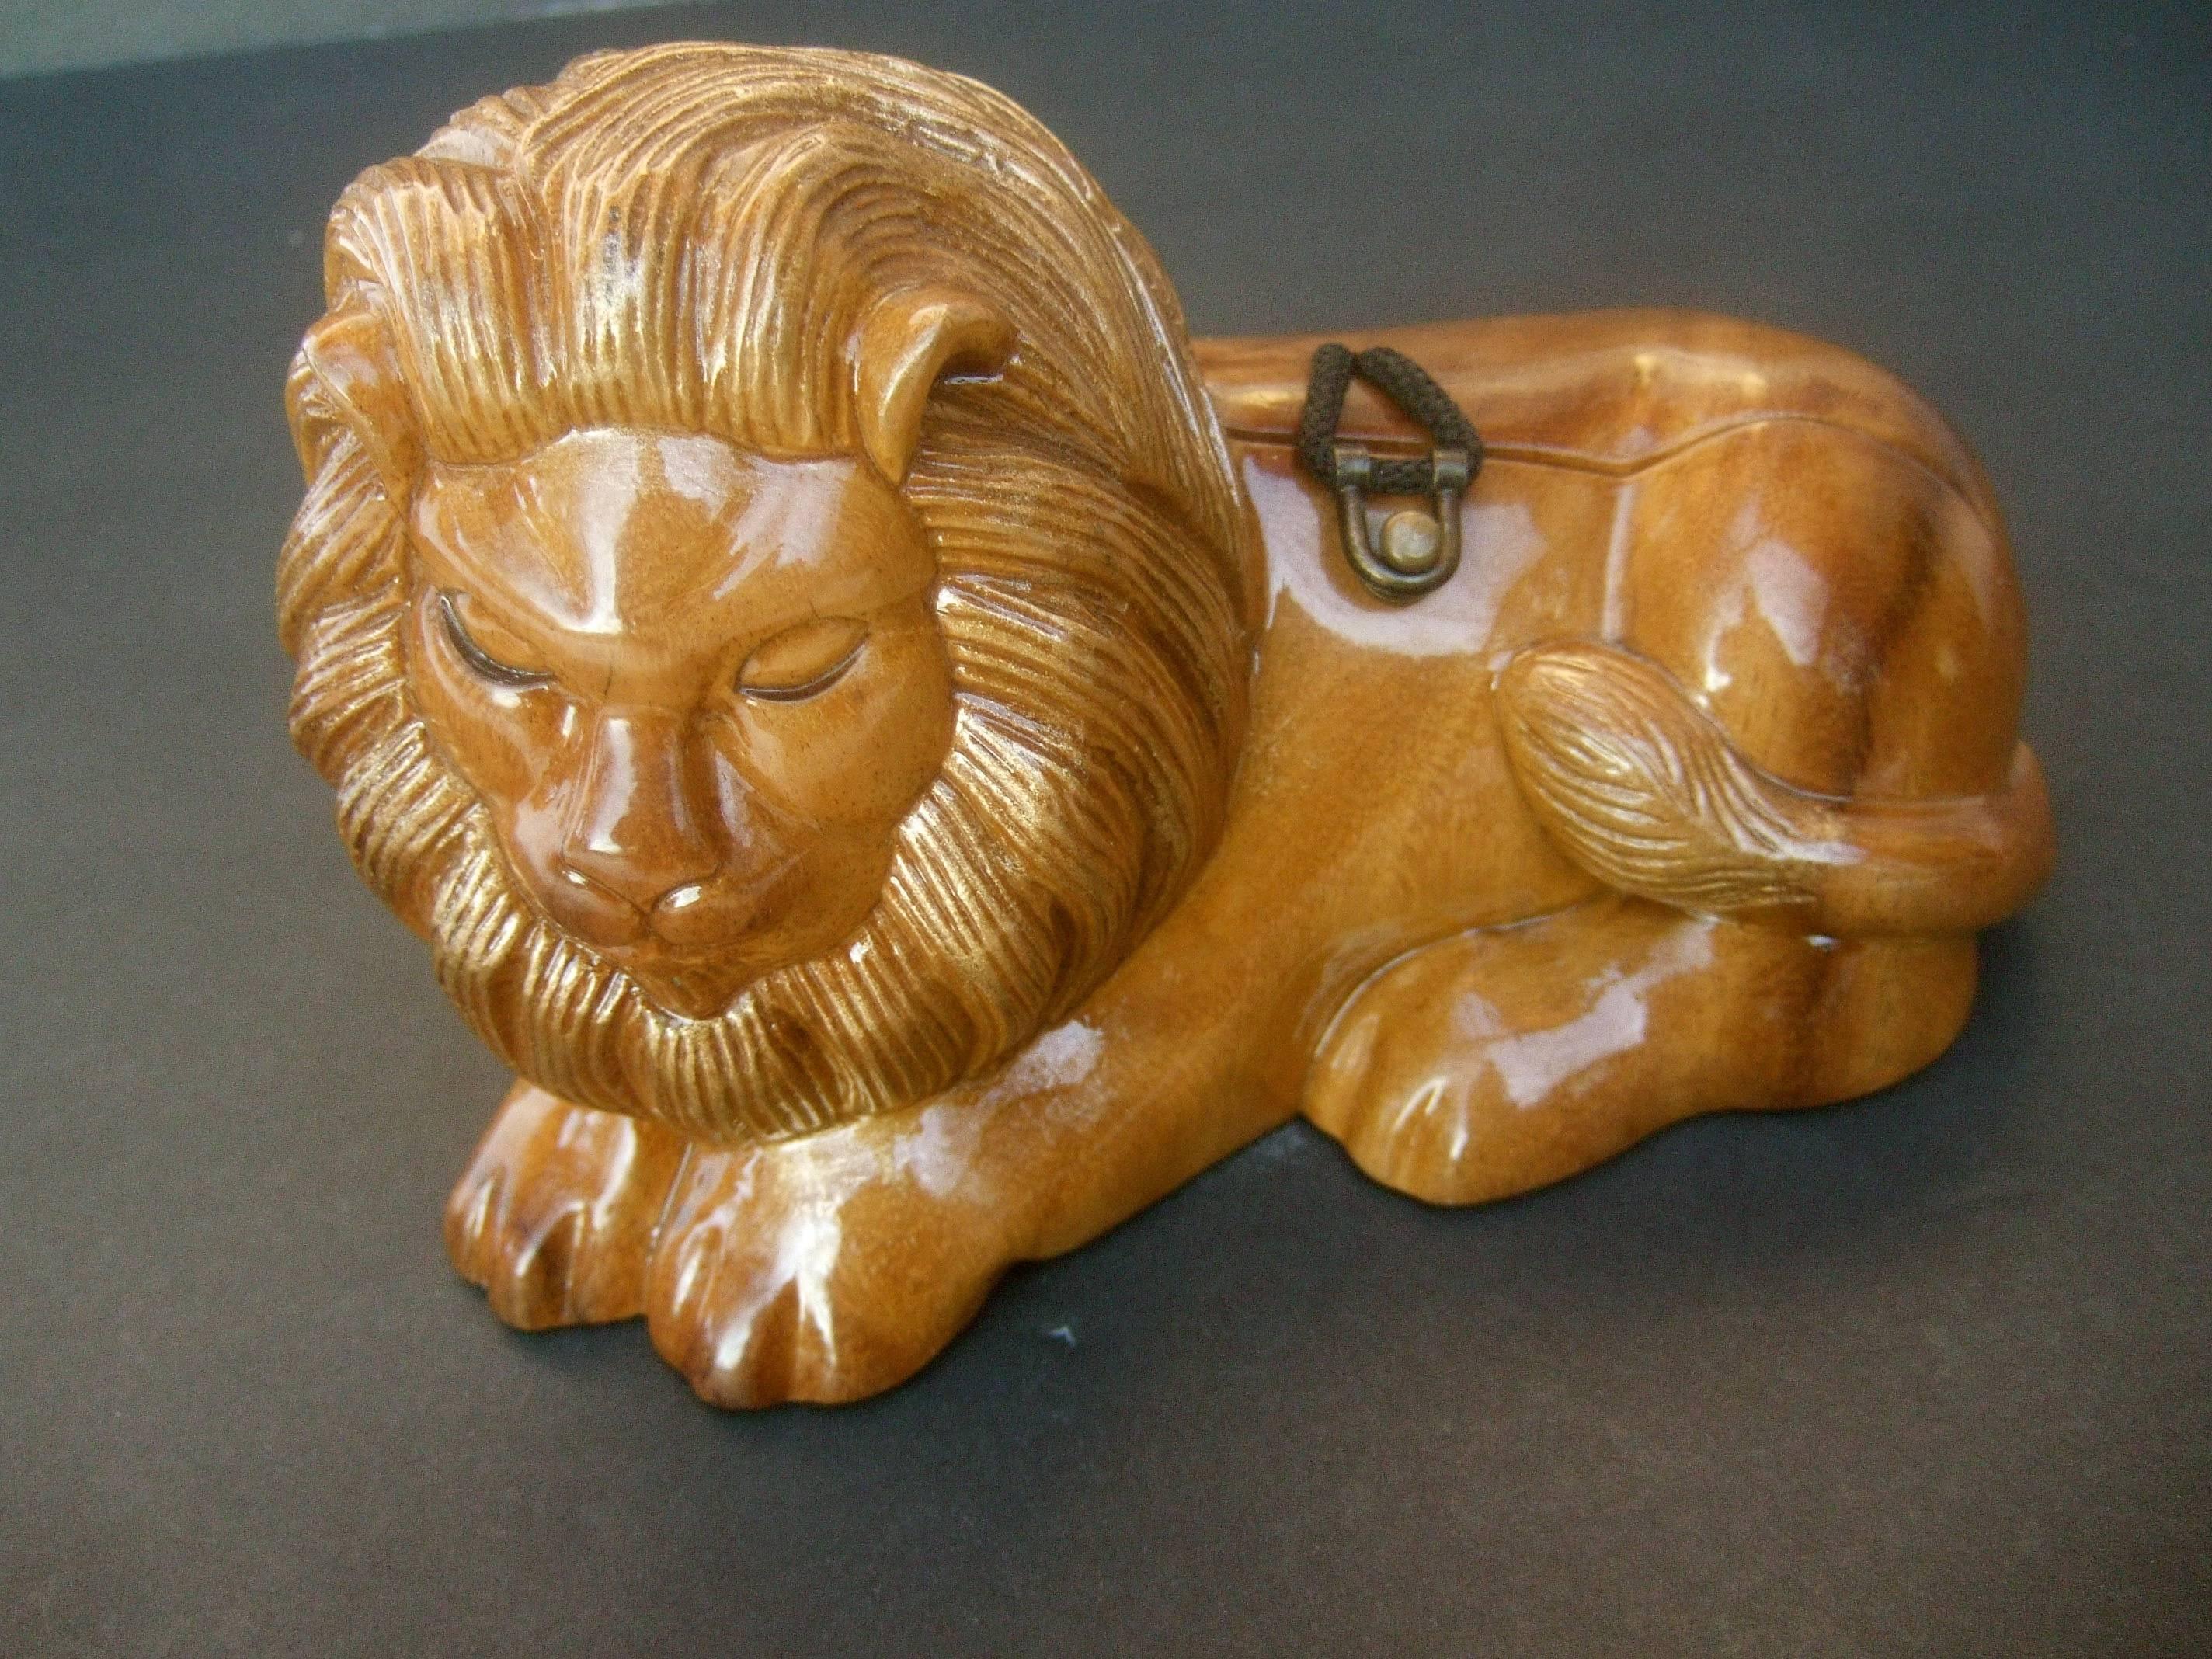 Timmy Woods Beverly Hills wood lion handbag 
The hand carved wood artisan handbag is designed 
in the shape of a majestic lion 

The carved features and sinuous mane are juxtaposed 
with smooth polished wood for the body. The versatile 
design may